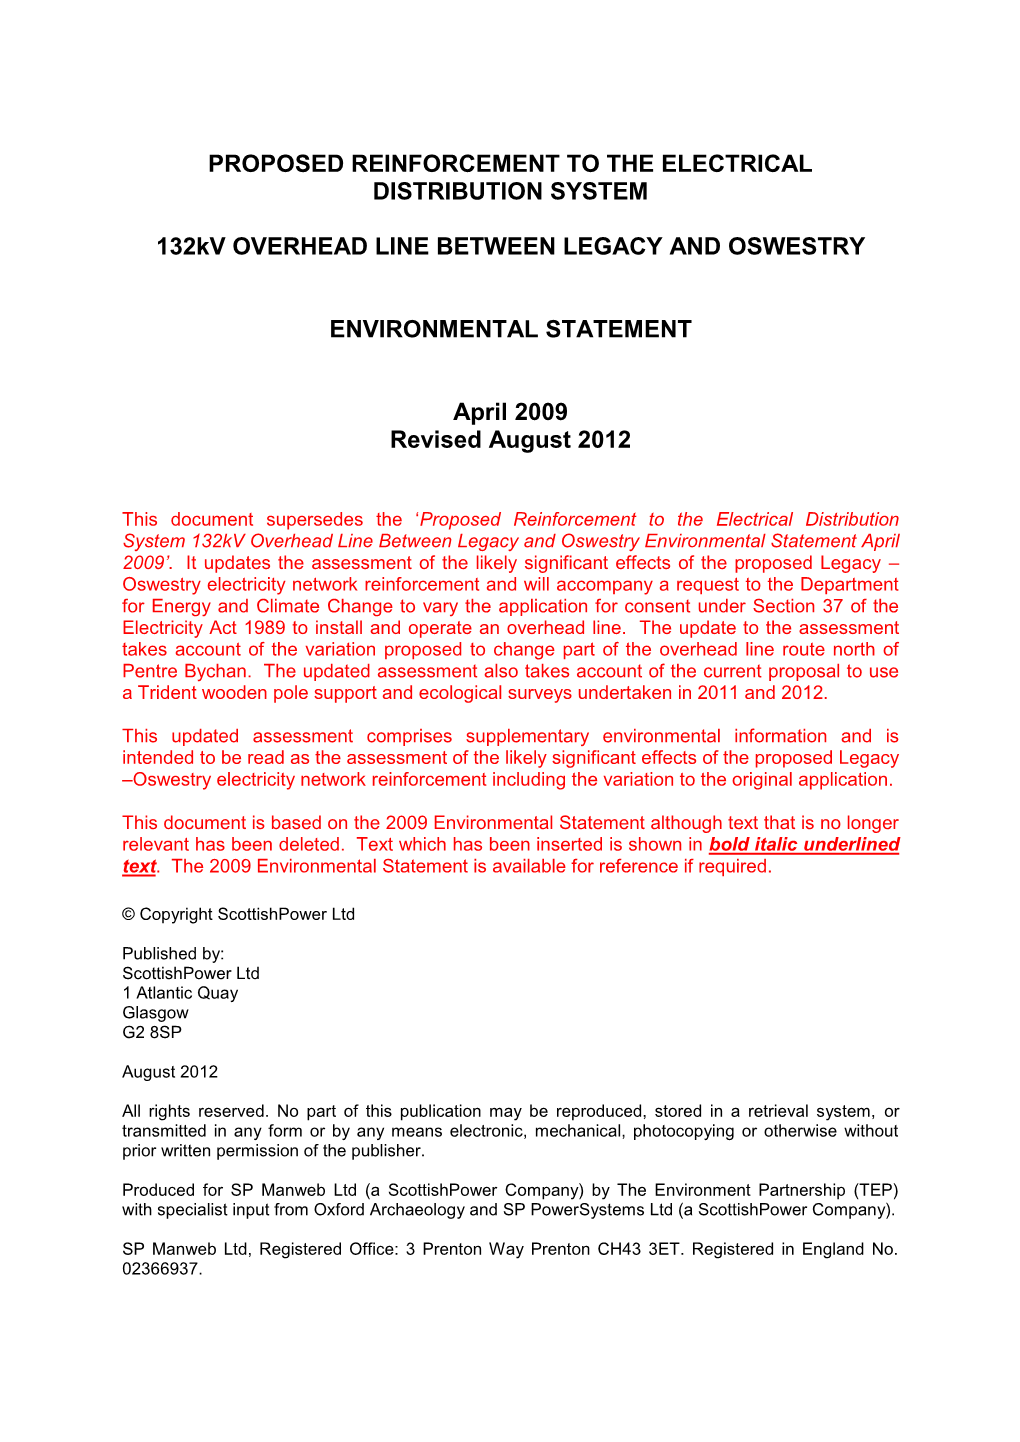 Proposed Reinforcement to the Electrical Distribution System 132Kv Overhead Line Between Legacy and Oswestry Environmental Statement April 2009’